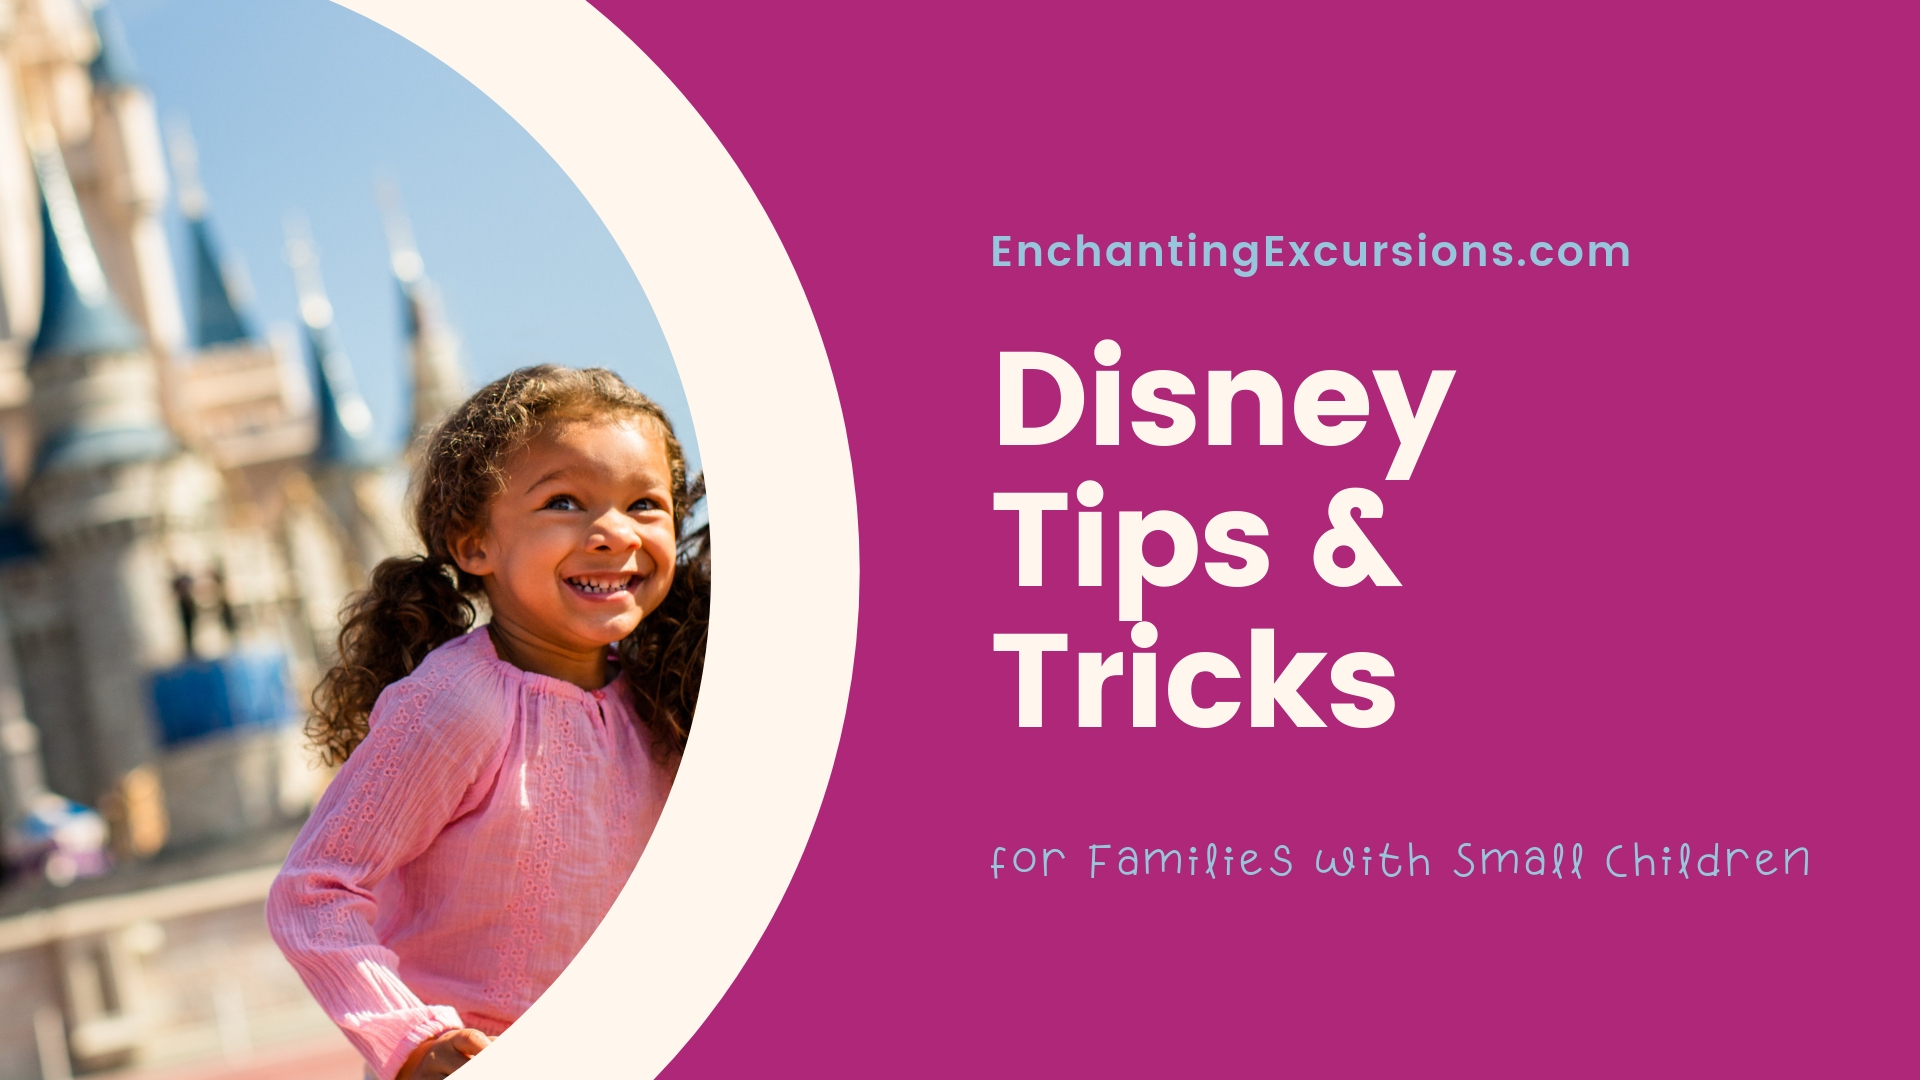 Disney tips and tricks for families with small children